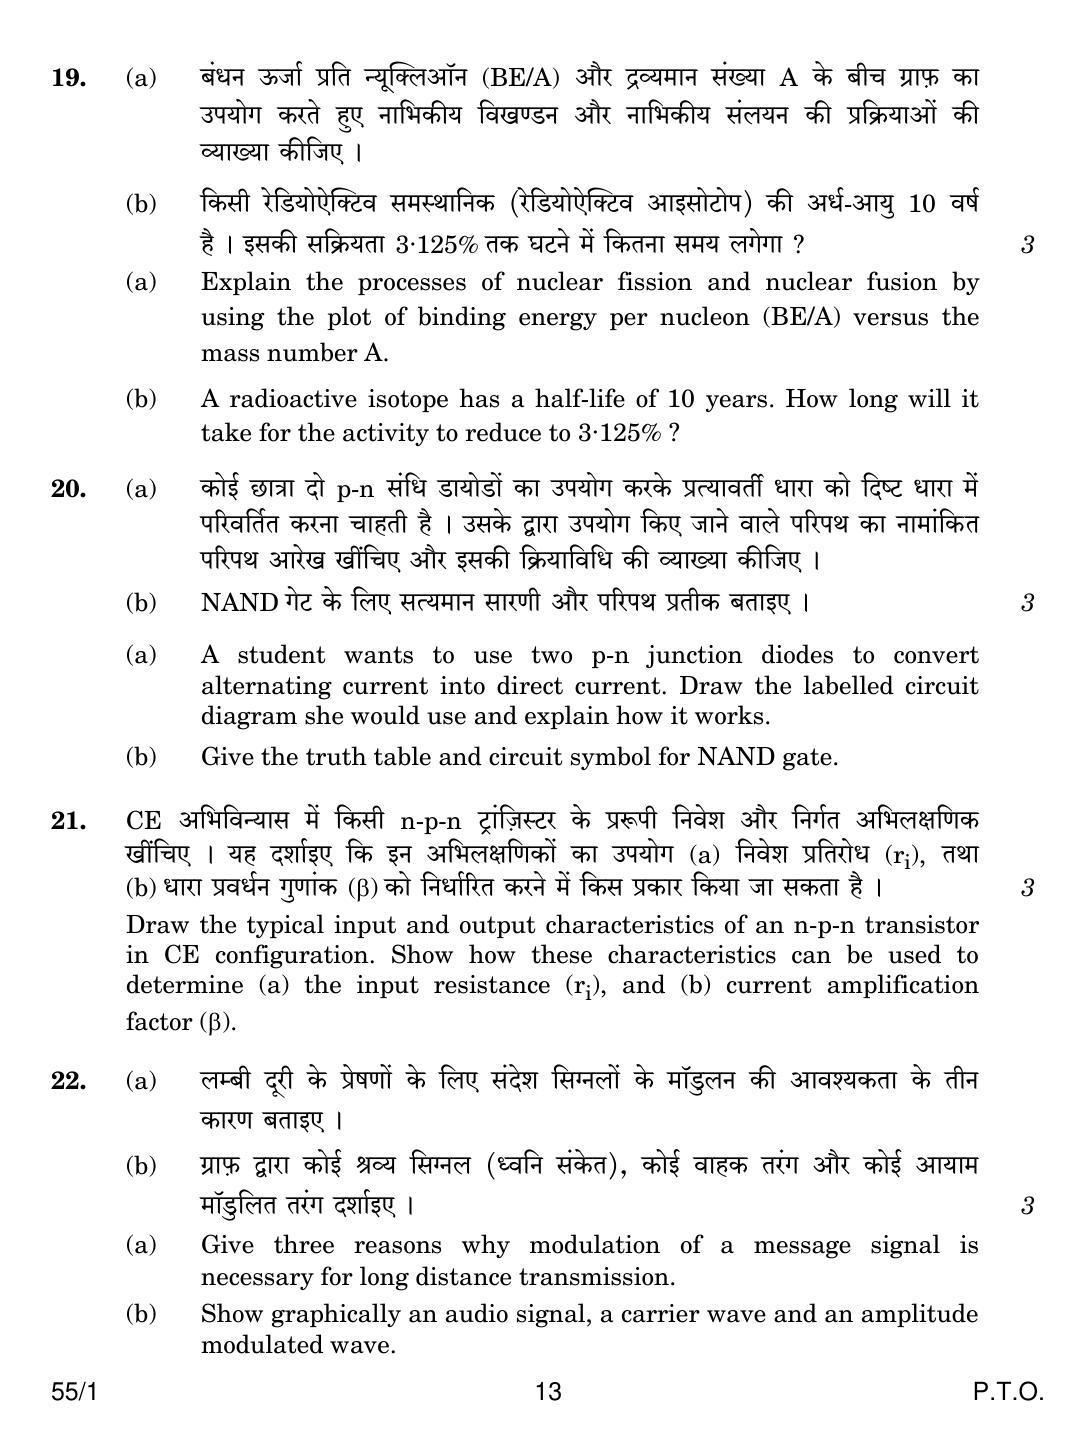 CBSE Class 12 55-1 PHYSICS 2018 Question Paper - Page 13